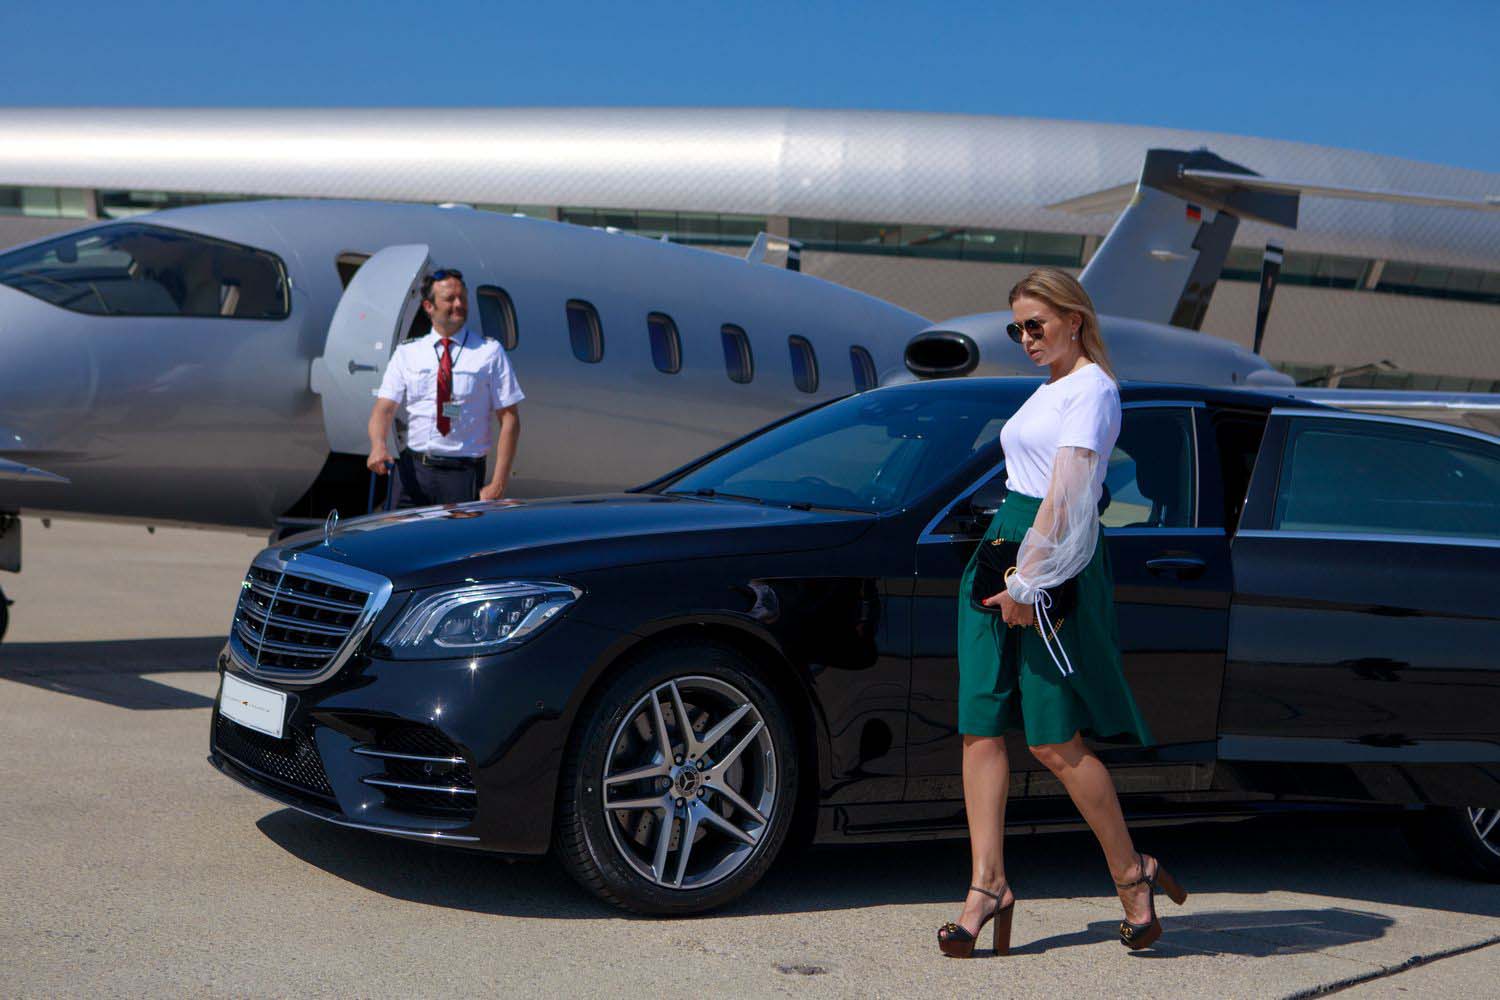 Best Istanbul Airport Transfer